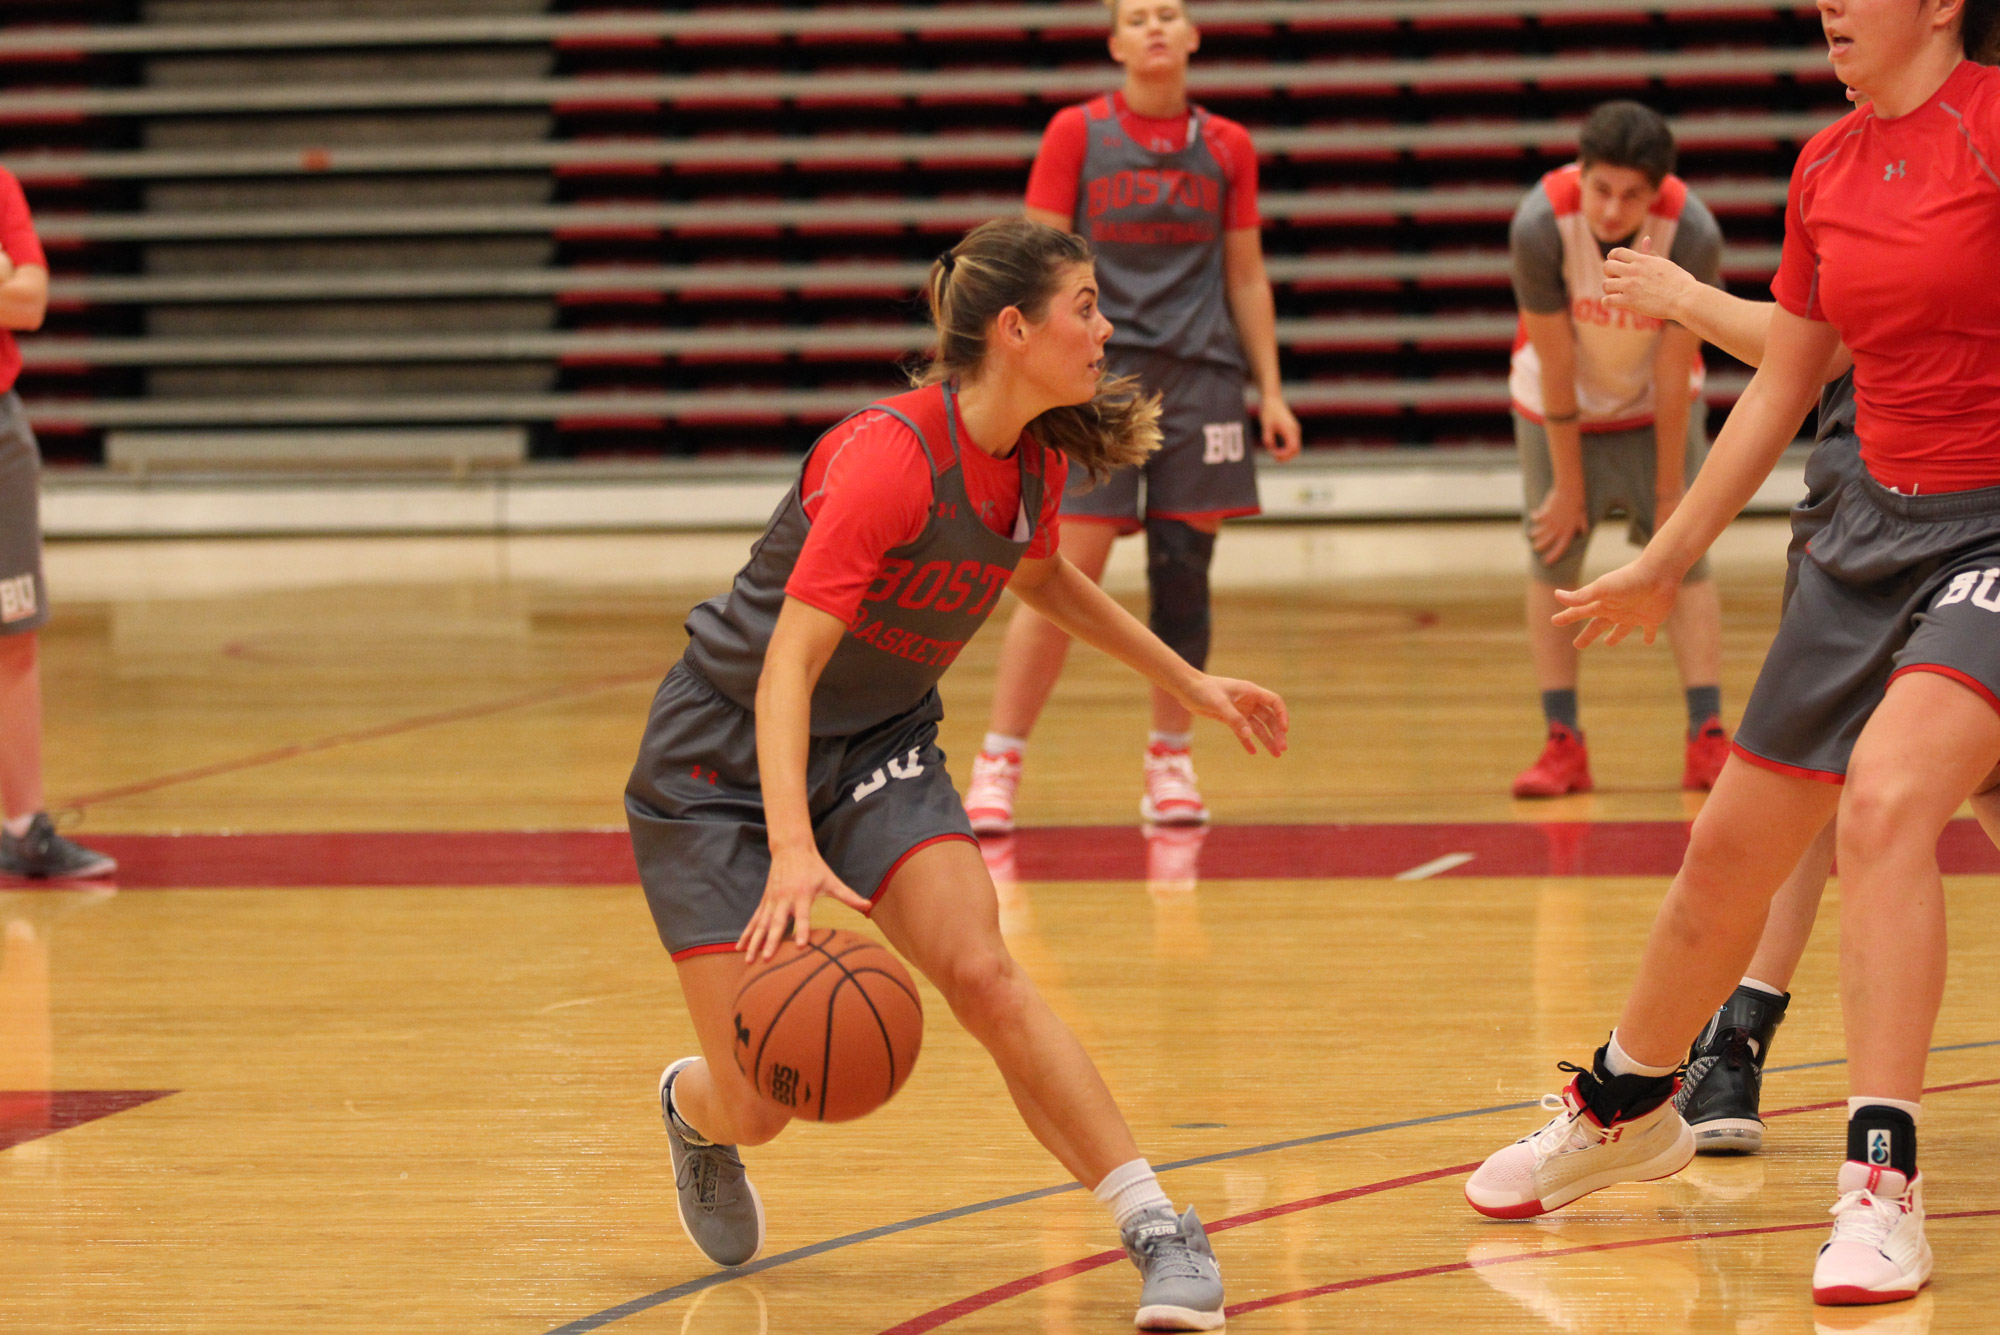 Katie Nelson (CGS’19, Questrom’21) dribbles a basketball